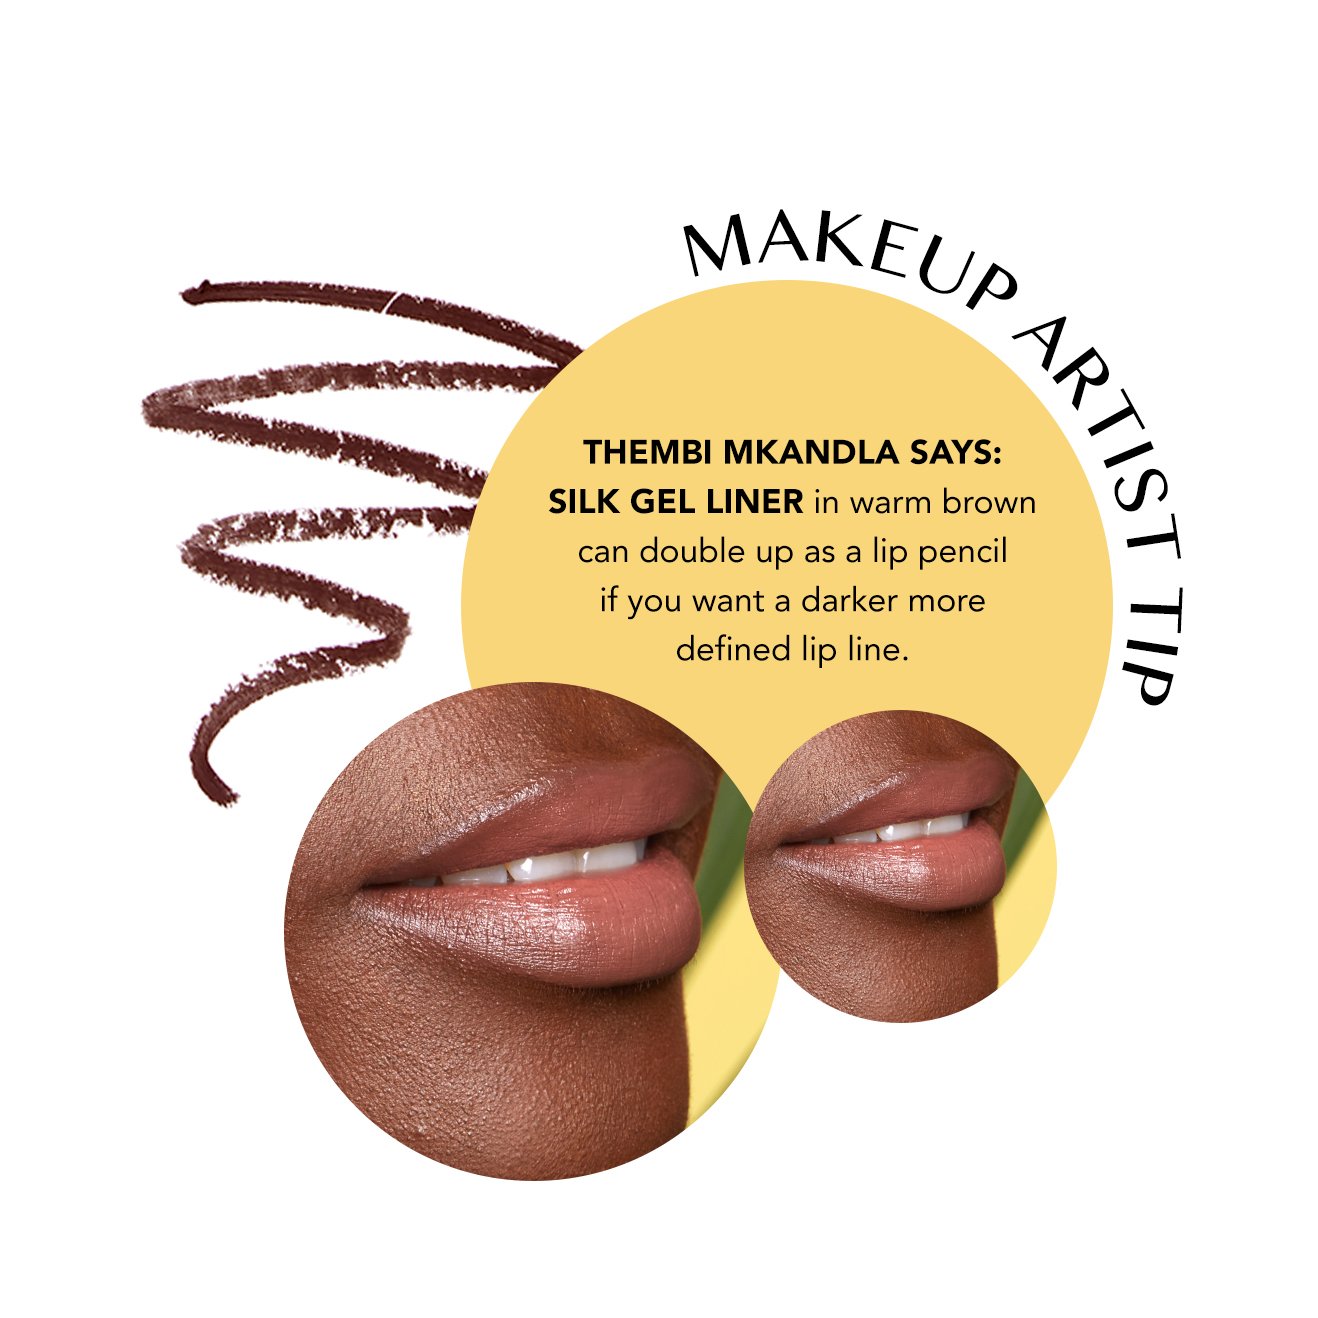 HOW TO CREATE THE OLIVE YOU LOOK WITH THEMBI MKANDLA AND GIFT – Tropic Skincare